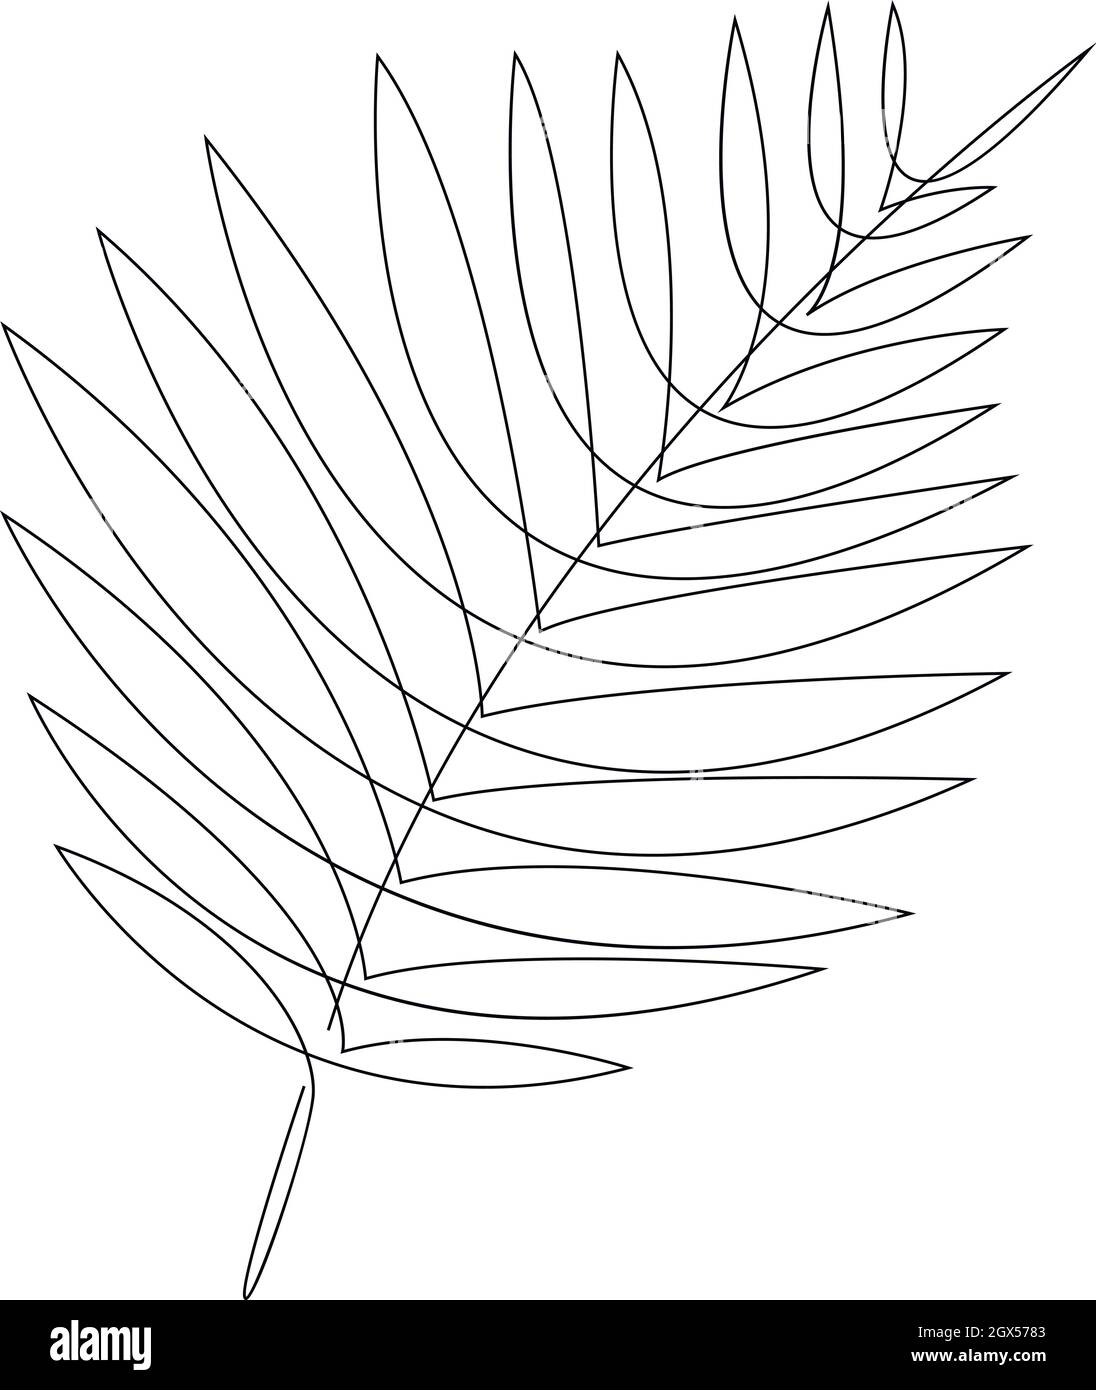 Palm leaf - one line drawing. Continuous line exotic plant. Hand-drawn minimalist illustration, vector Stock Vector